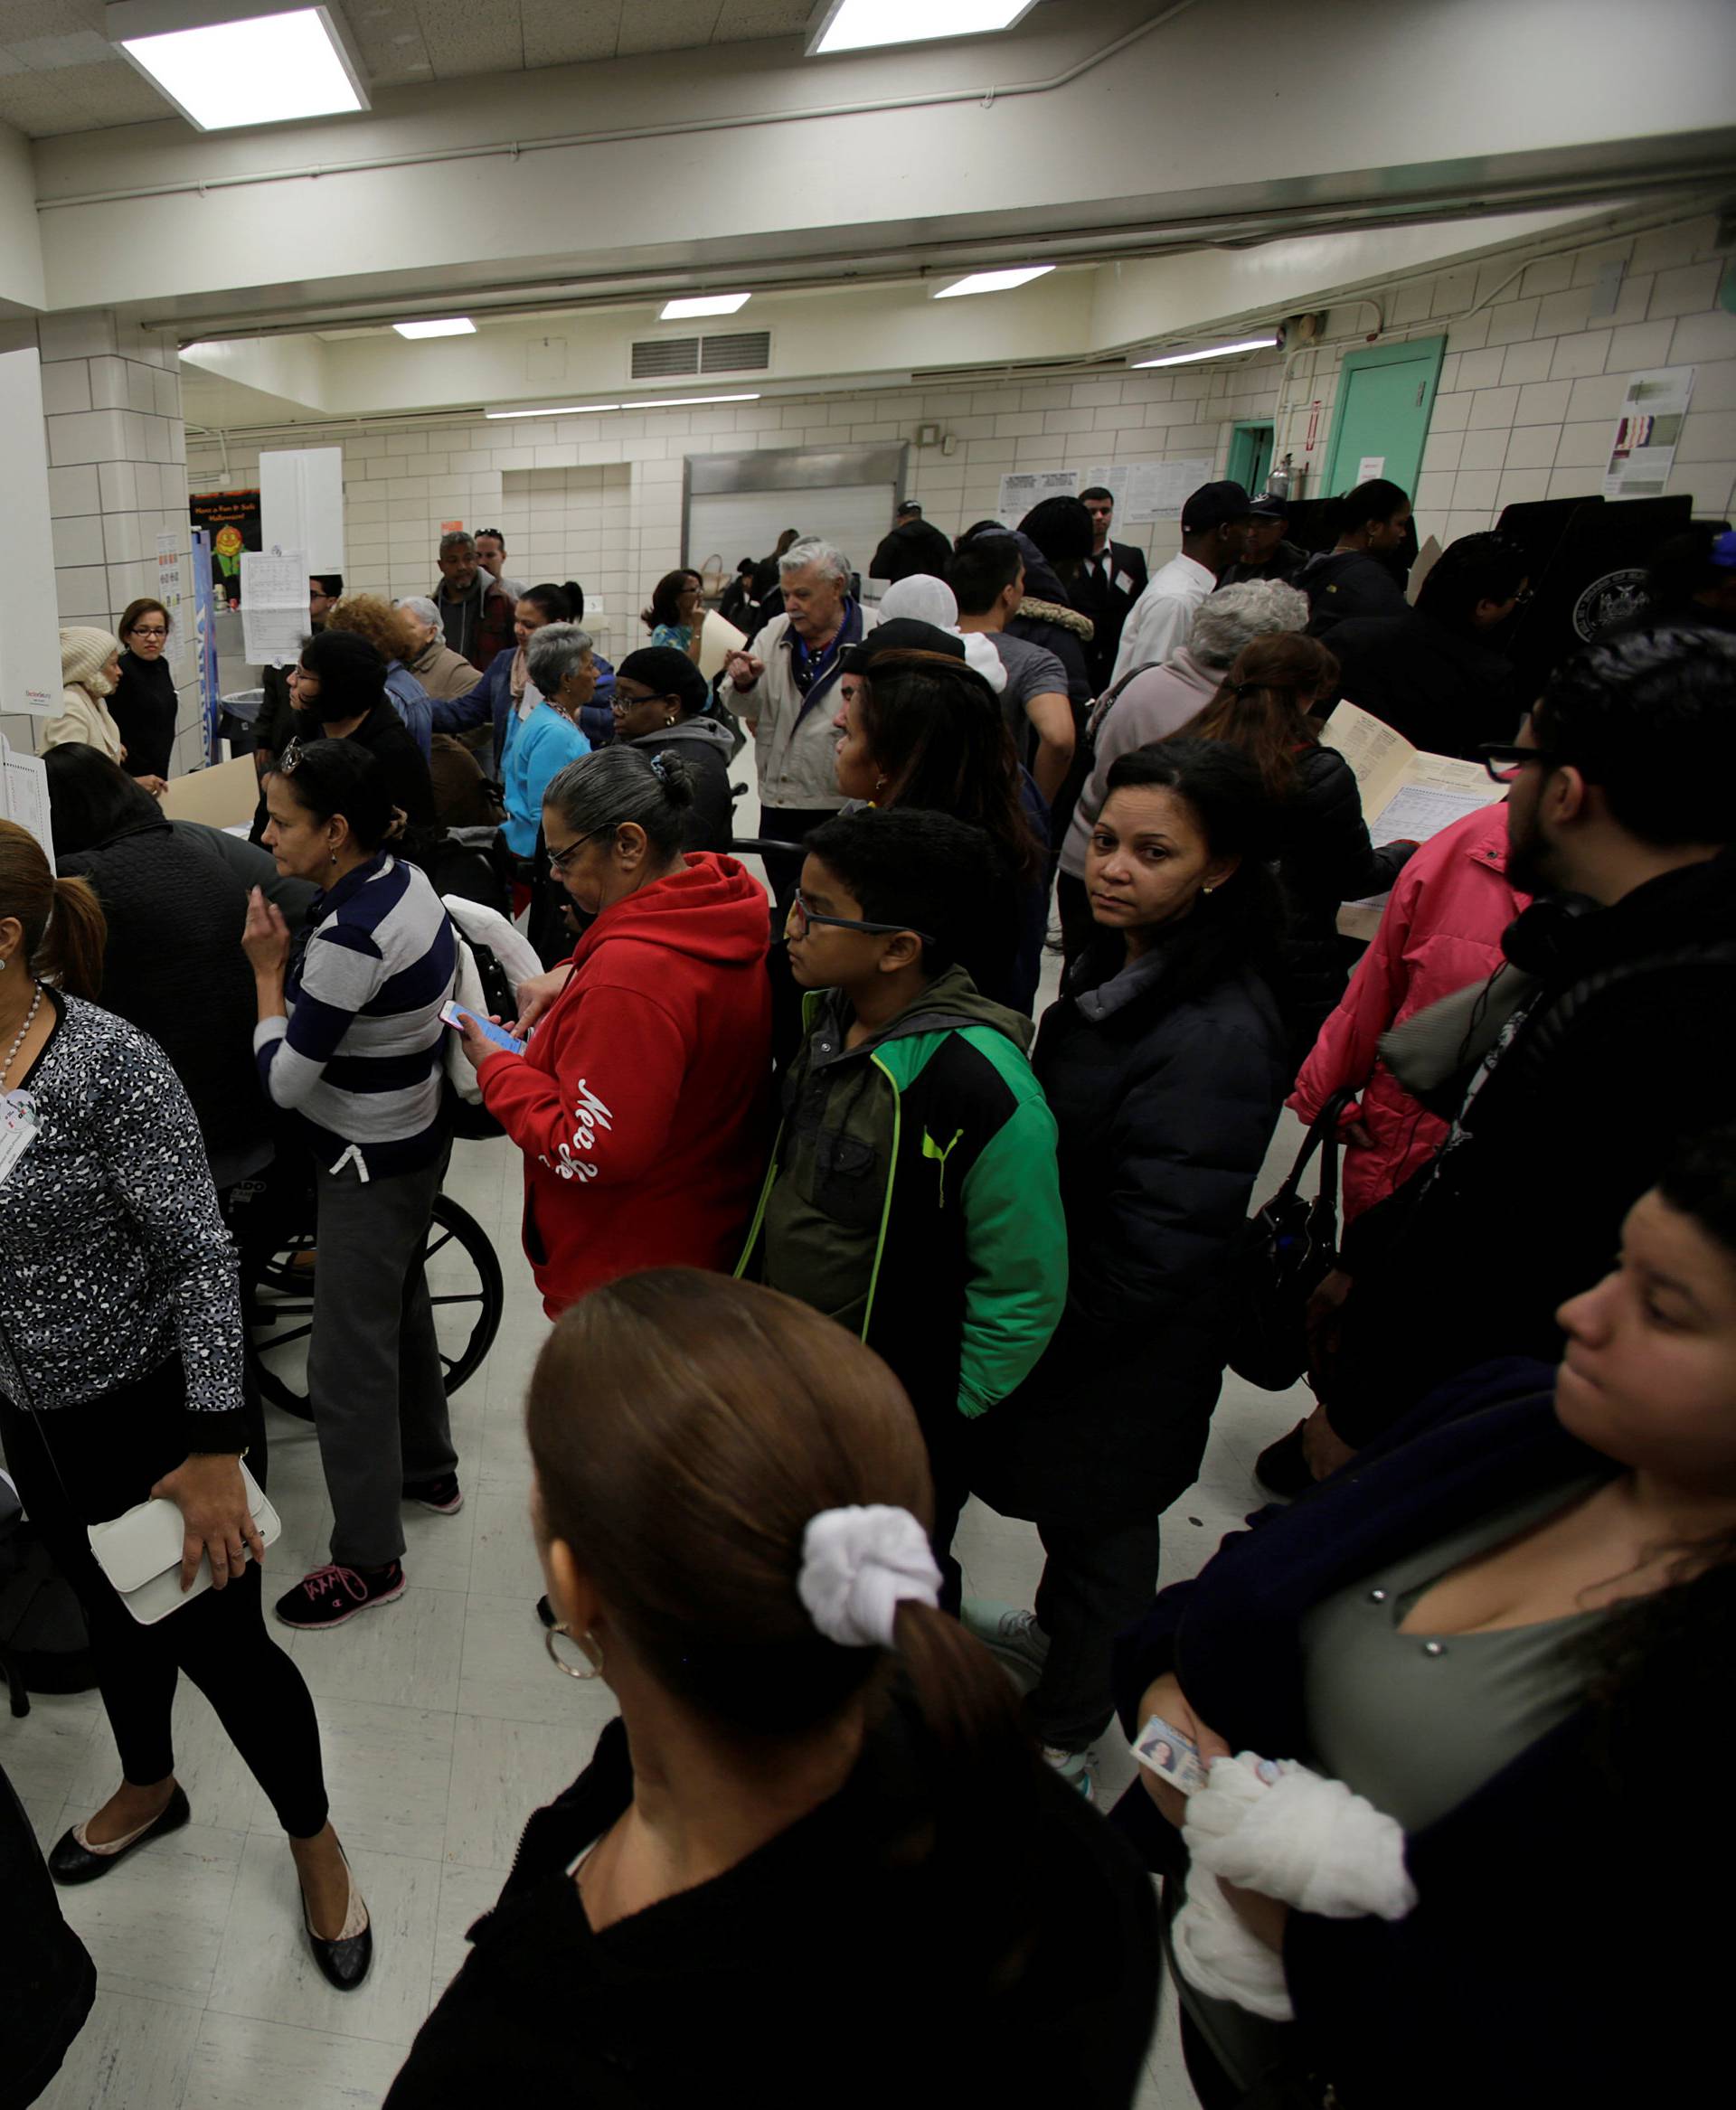 Voters register to vote during the U.S. presidential election at a polling station in the Bronx Borough of New York,